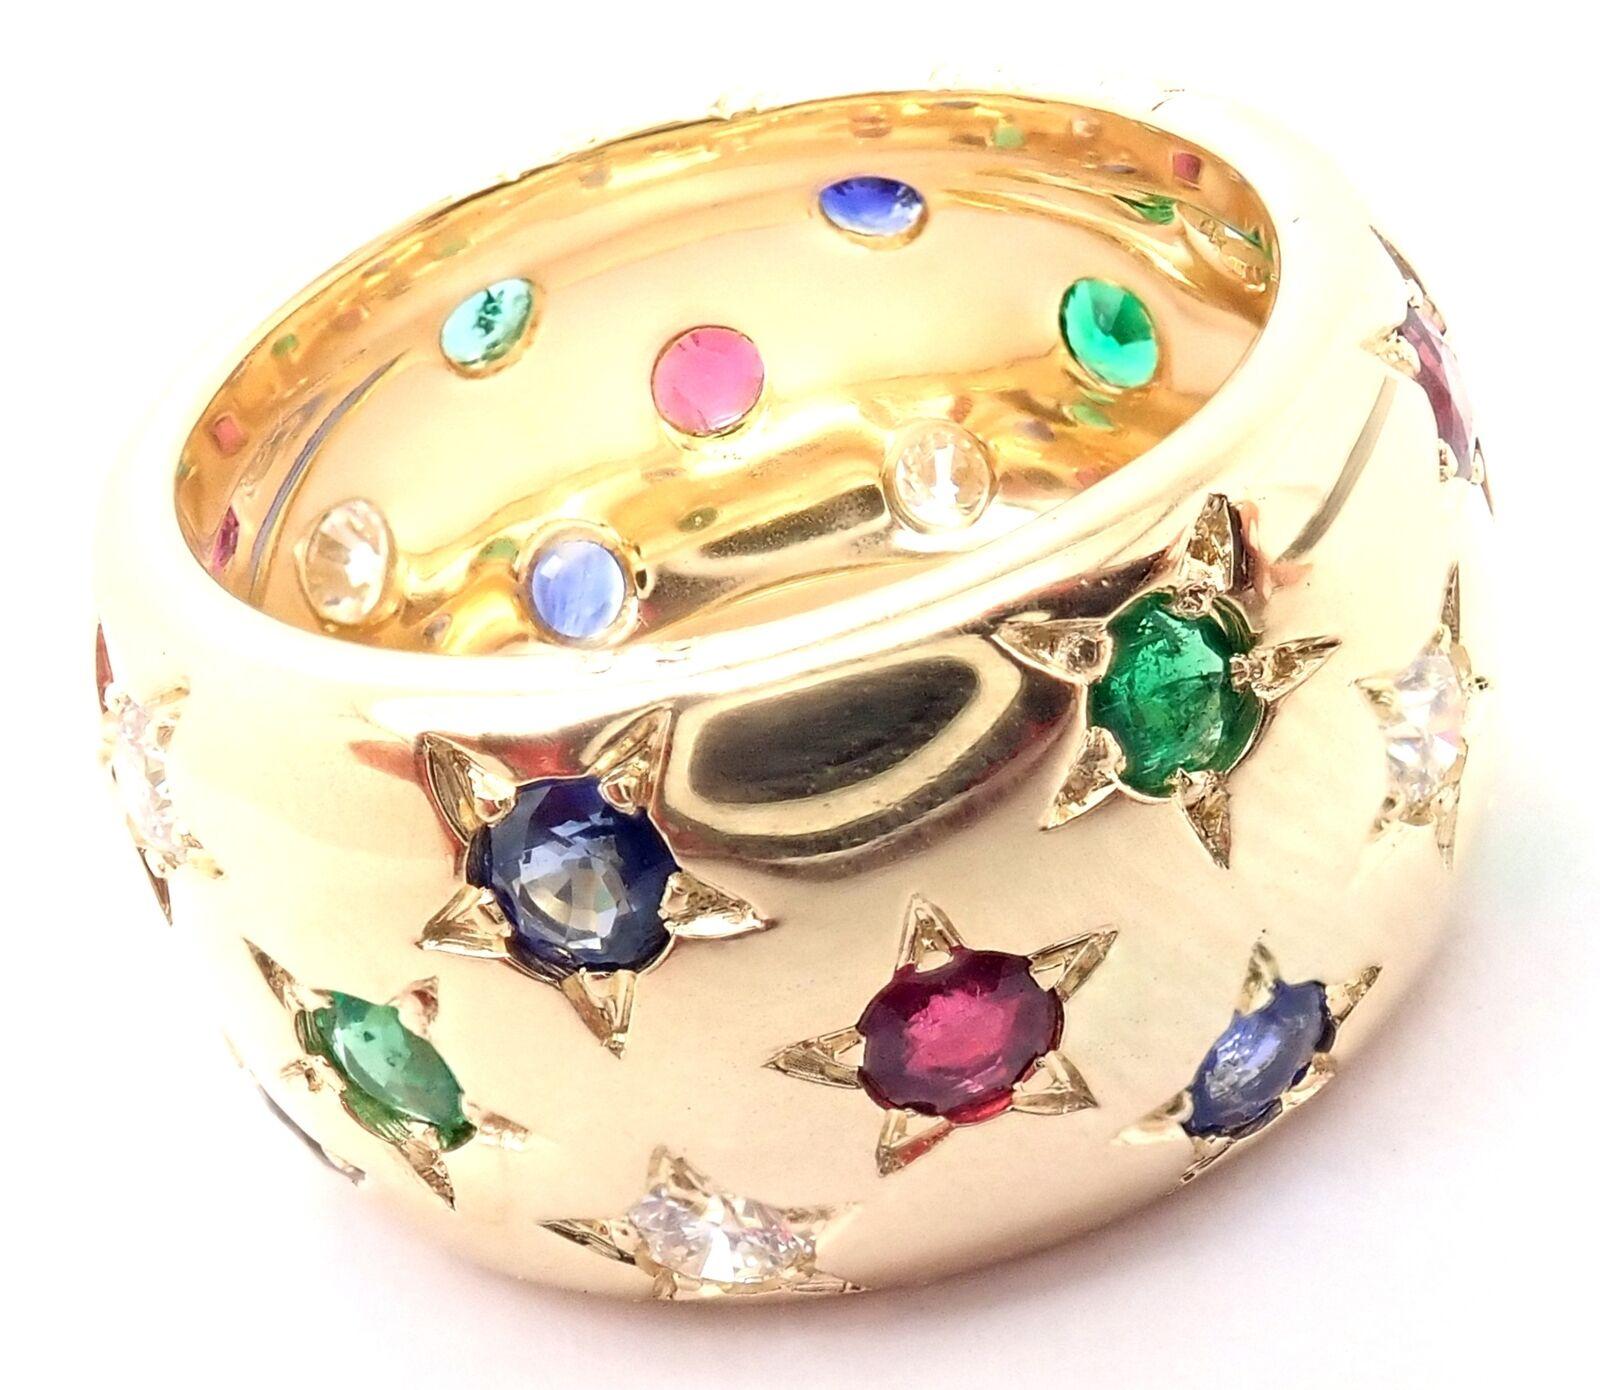 18k Yellow Gold Diamond Sapphire Emerald Ruby Wide Star Band Ring by Cartier.
With Round brilliant cut diamonds VVS1 clarity, F-H color Round rubies, emeralds and sapphires
7 round sapphires
8 round emeralds
6 round rubies
This ring comes with